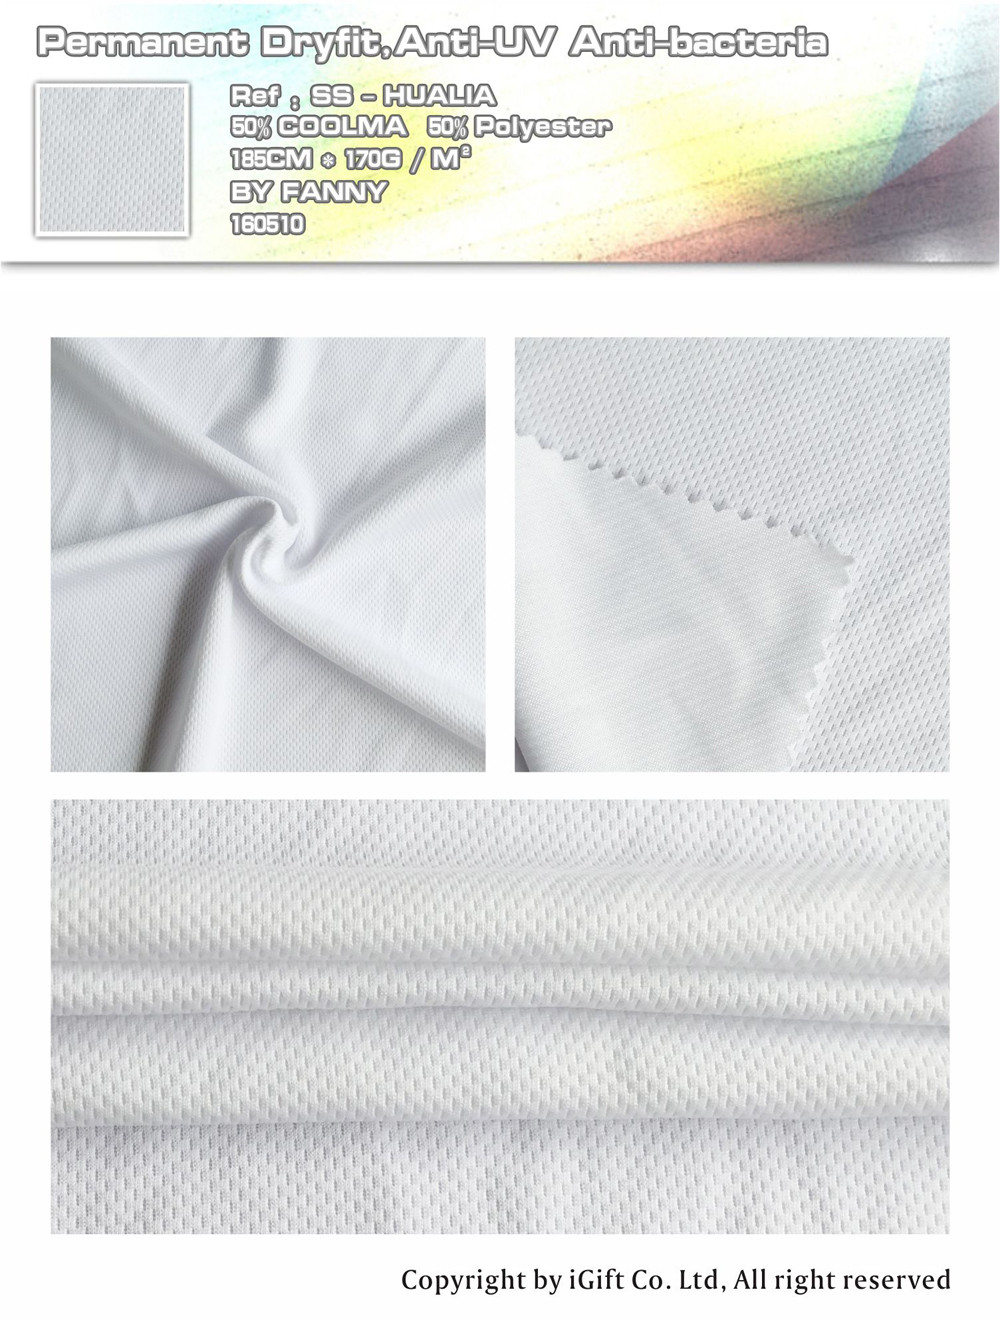 Permanent Dryfit,Anti-UV Anit-bacteria   Ref:SS-HUALIA    50％ COOLMA   50％Polyester    185CM*170G/M²   BY  FANNY   160510